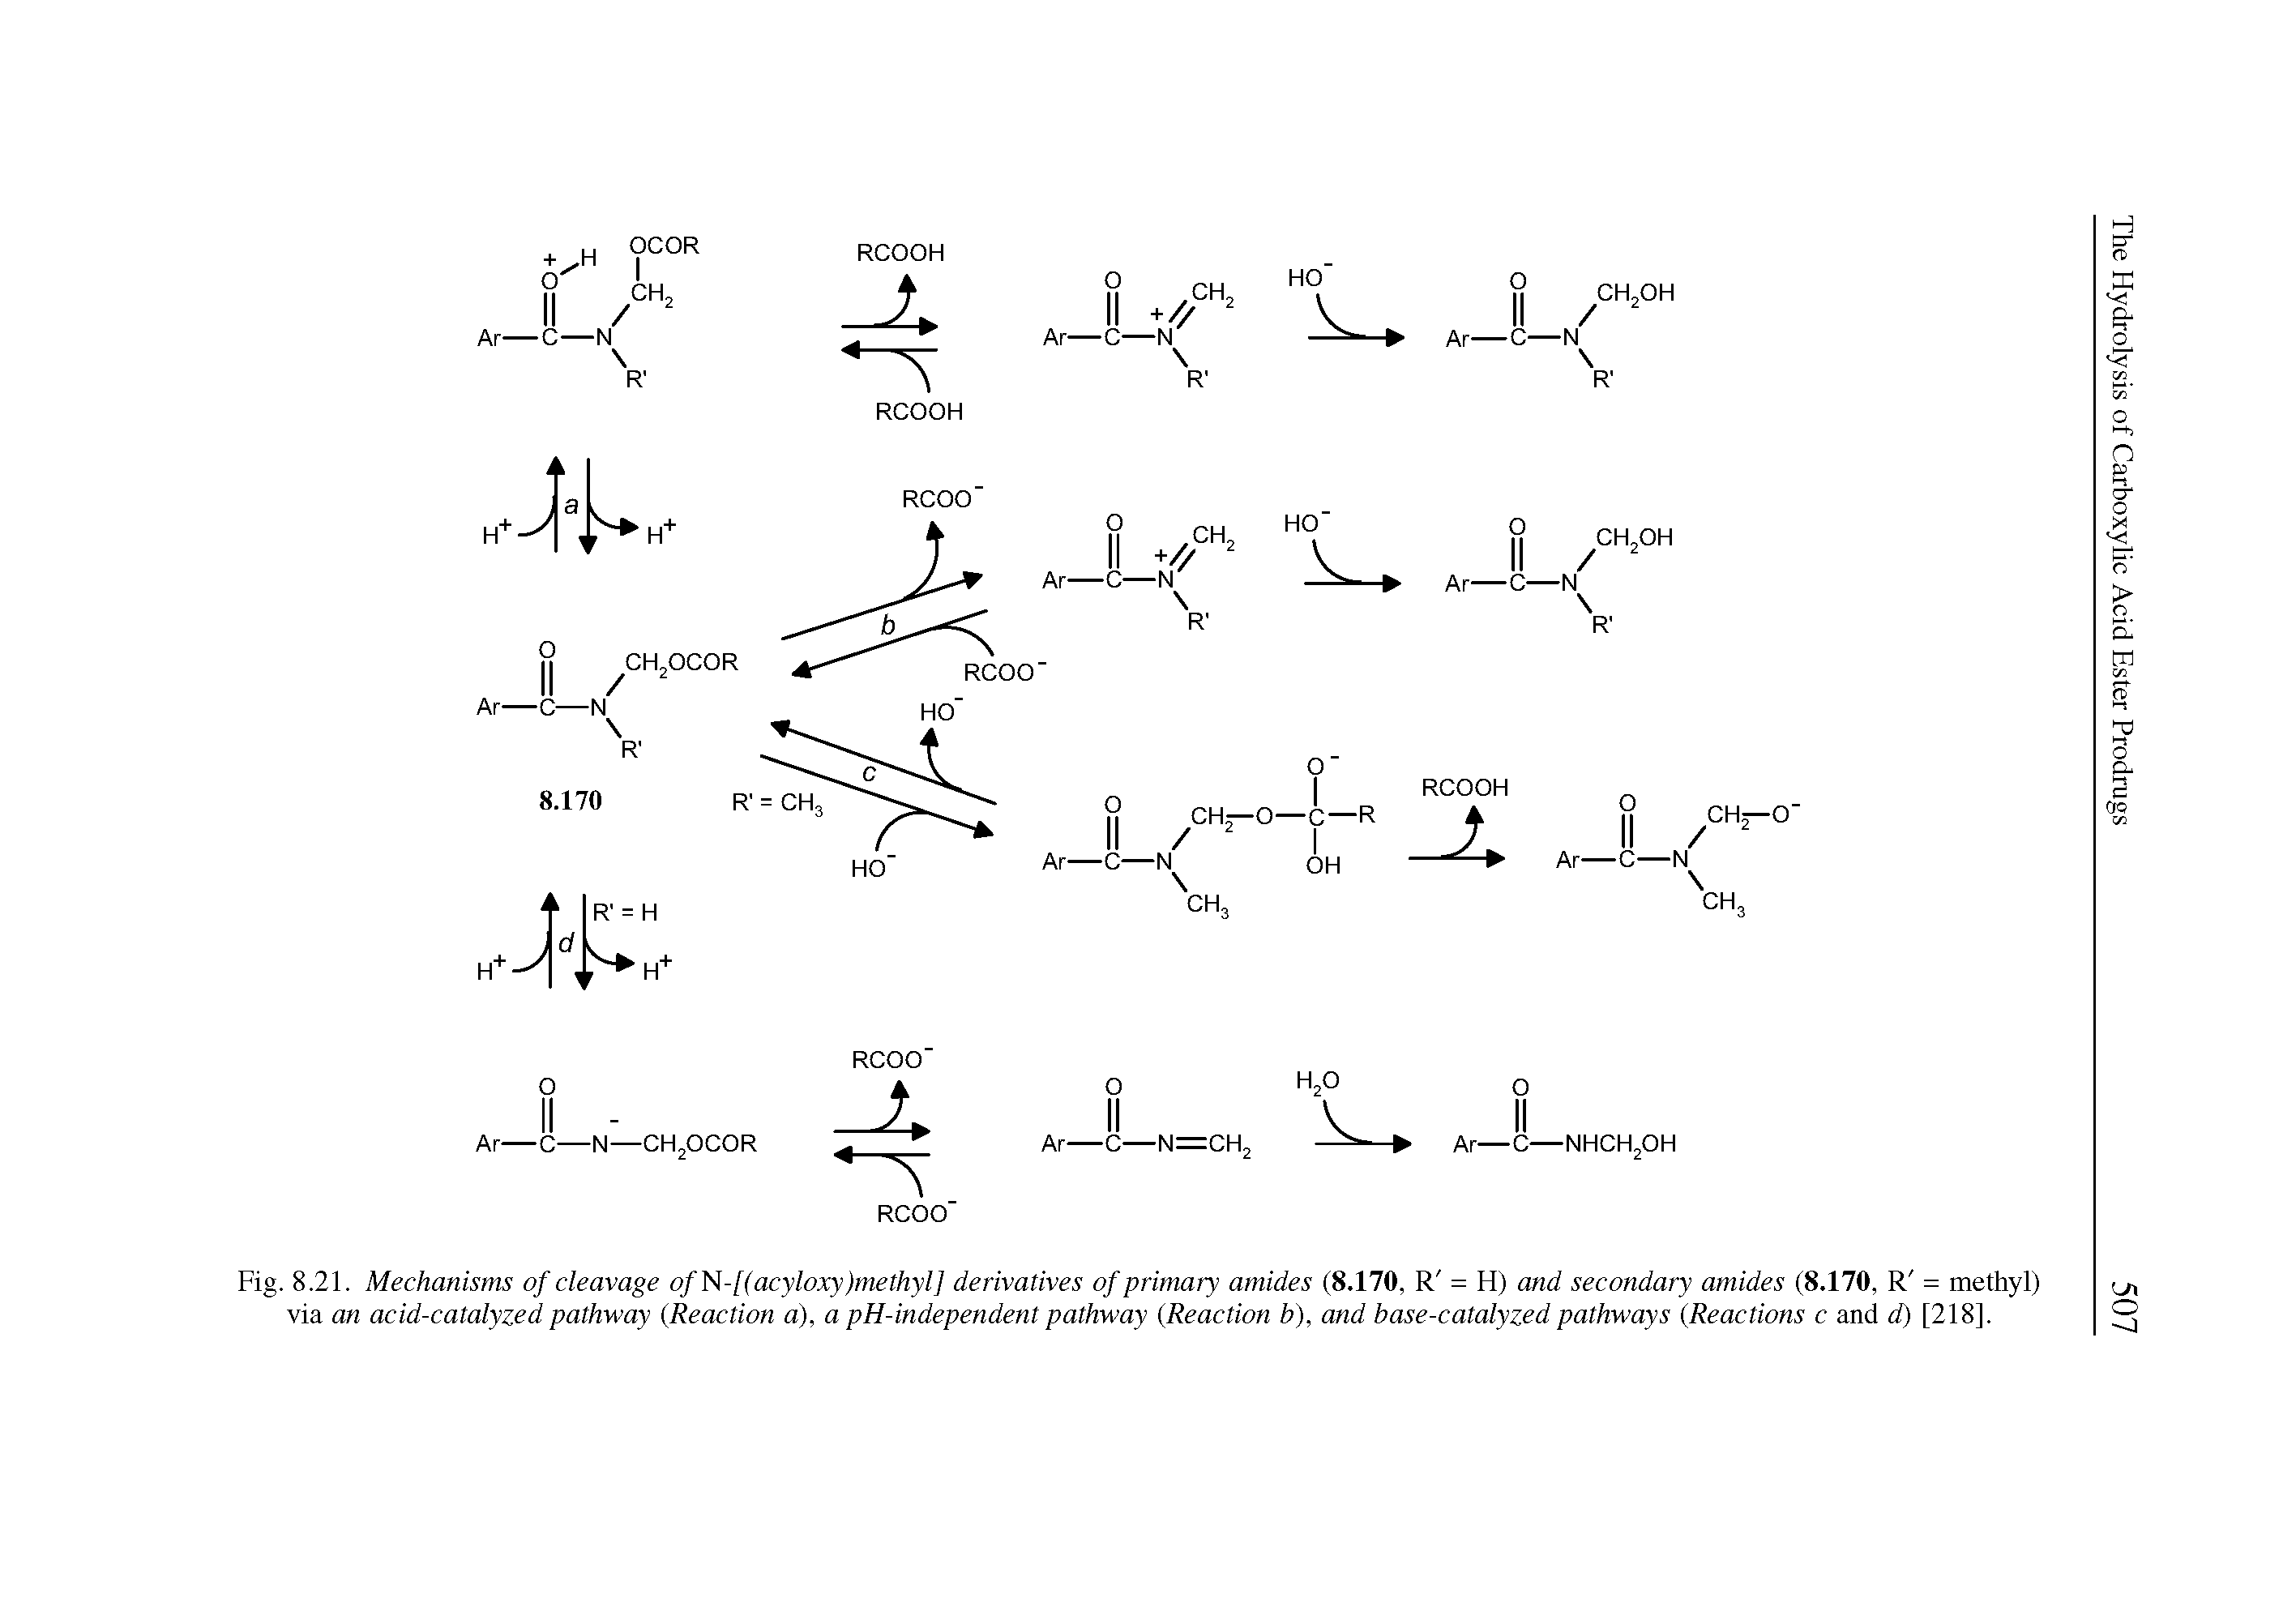 Fig. 8.21. Mechanisms of cleavage ofN-[(acyloxy)methyl] derivatives of primary amides (8.170, R = H) and secondary amides (8.170, R = methyl) via an acid-catalyzed pathway (.Reaction a), a pH-independent pathway (.Reaction b), and base-catalyzed pathways (Reactions c and d) [218].